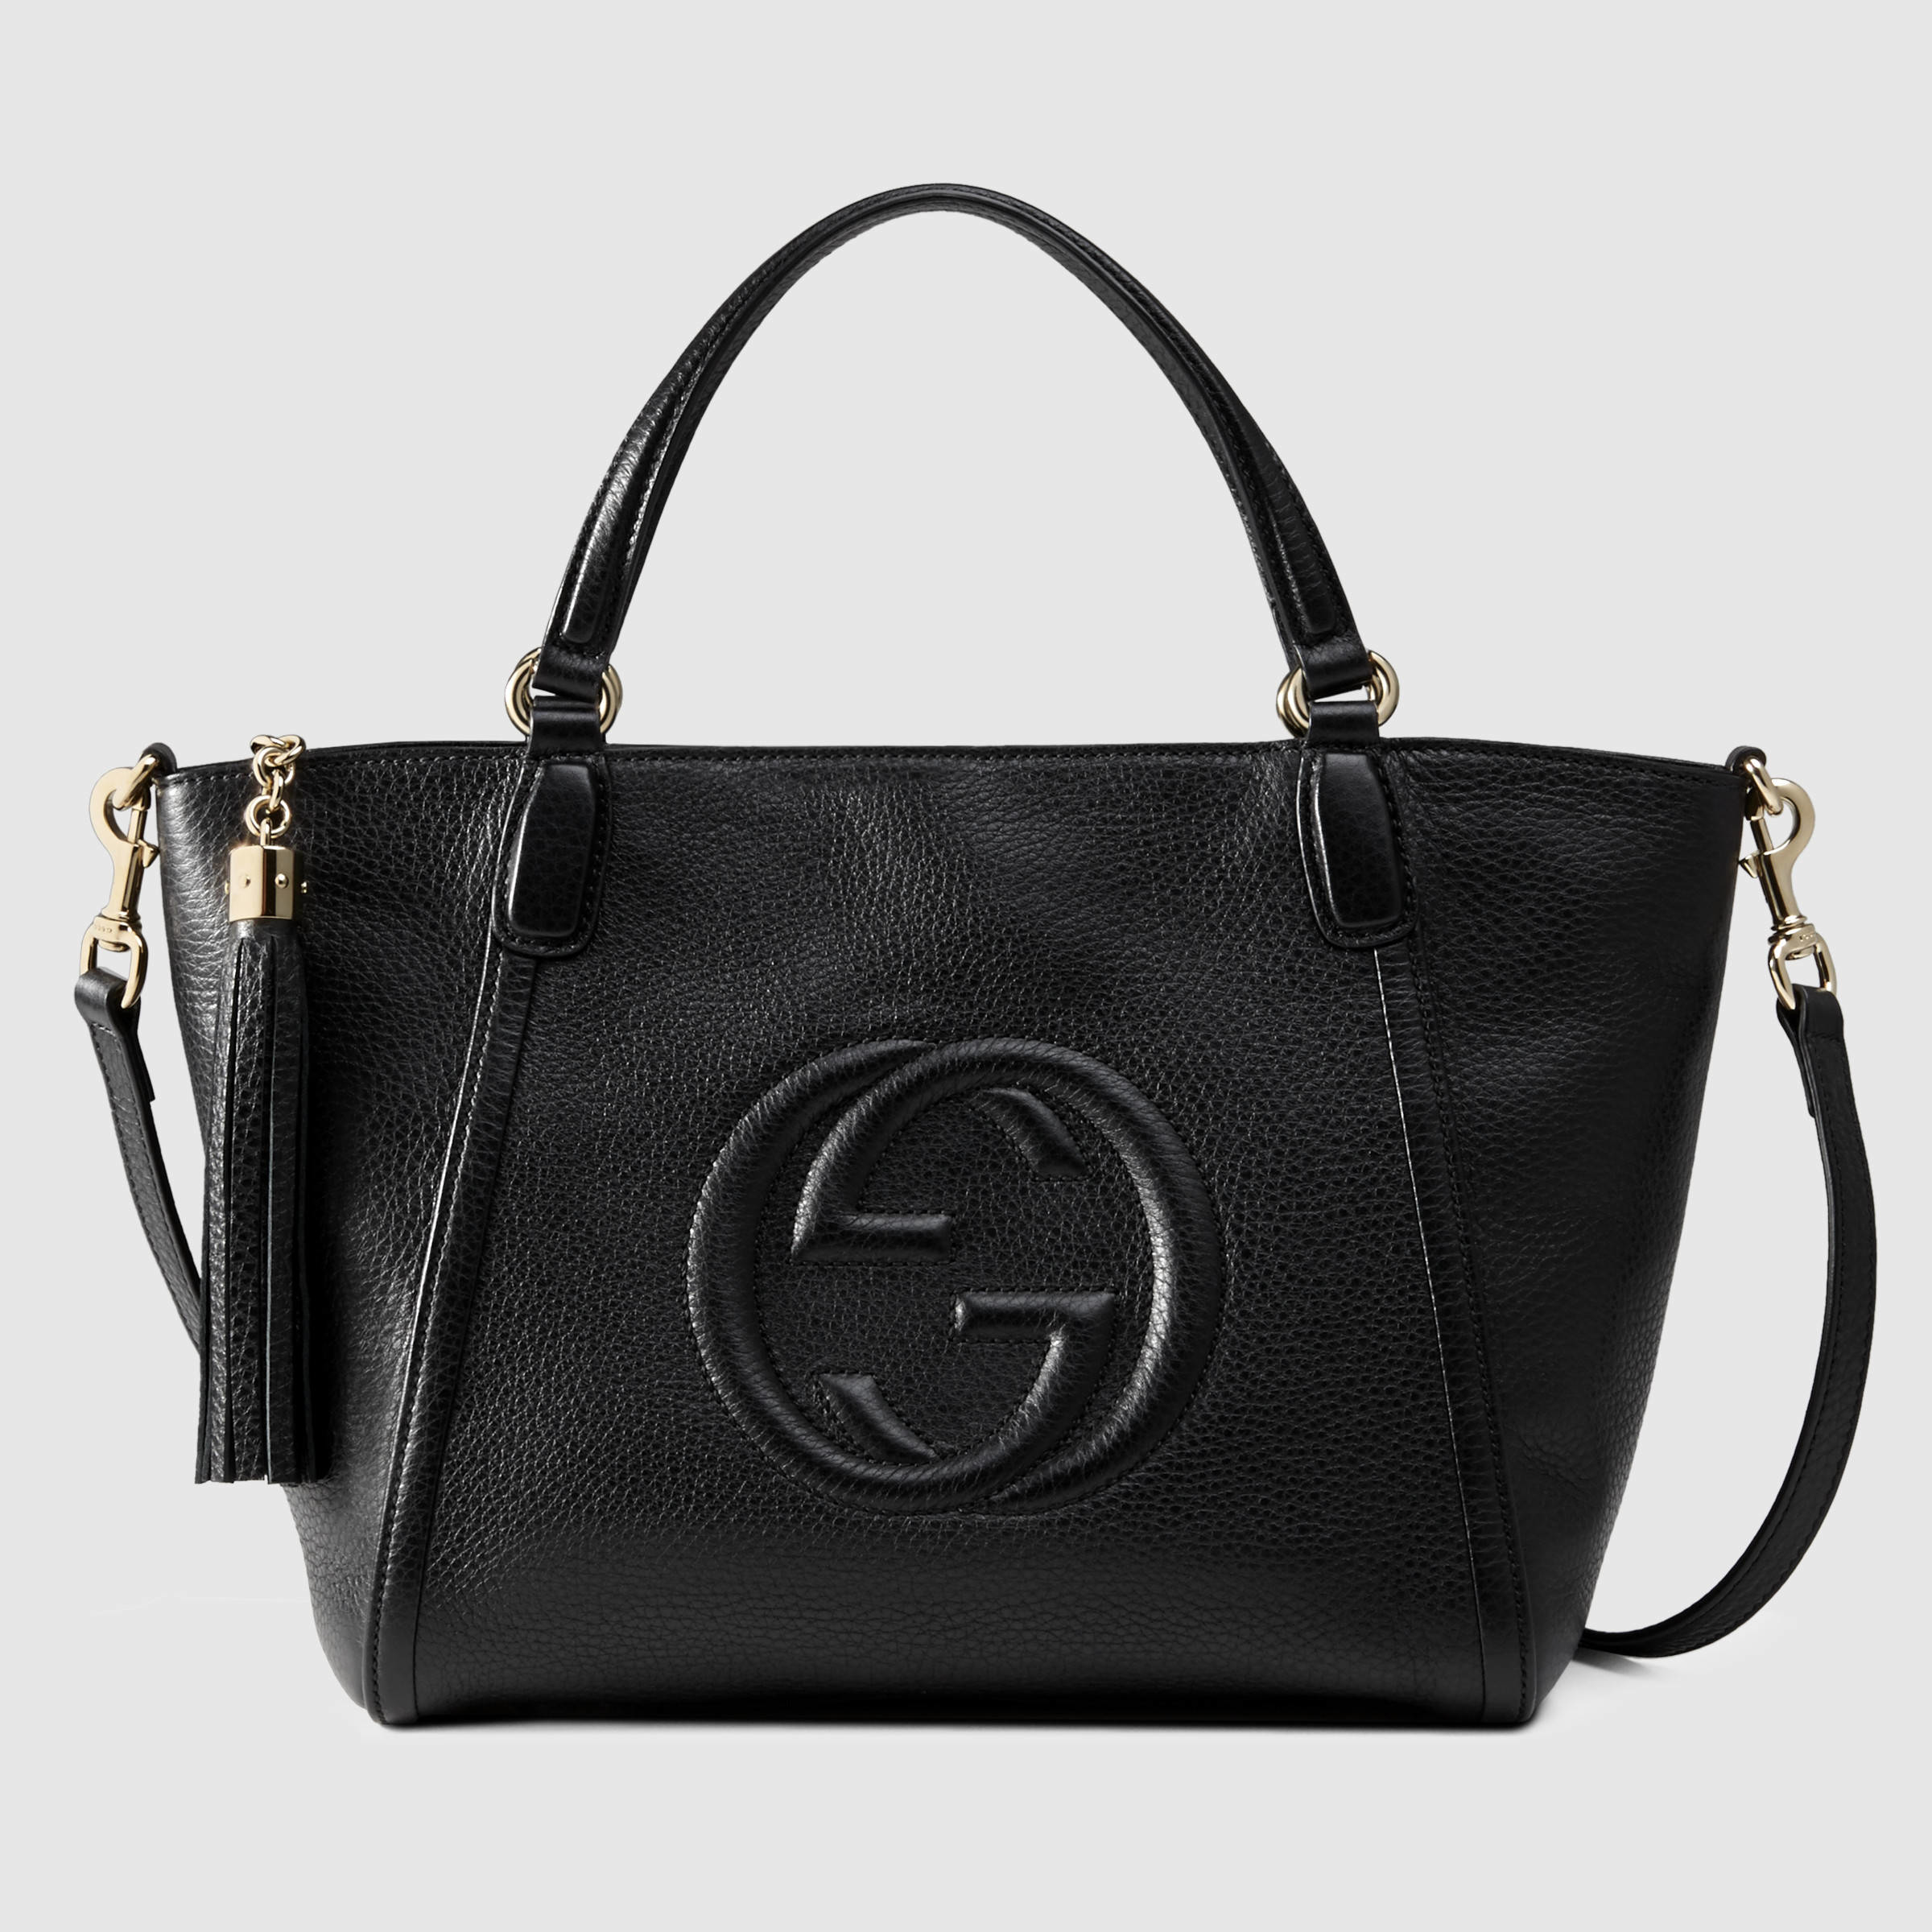 Gucci Soho Leather Top Handle Bag in Black Leather (Black) - Lyst